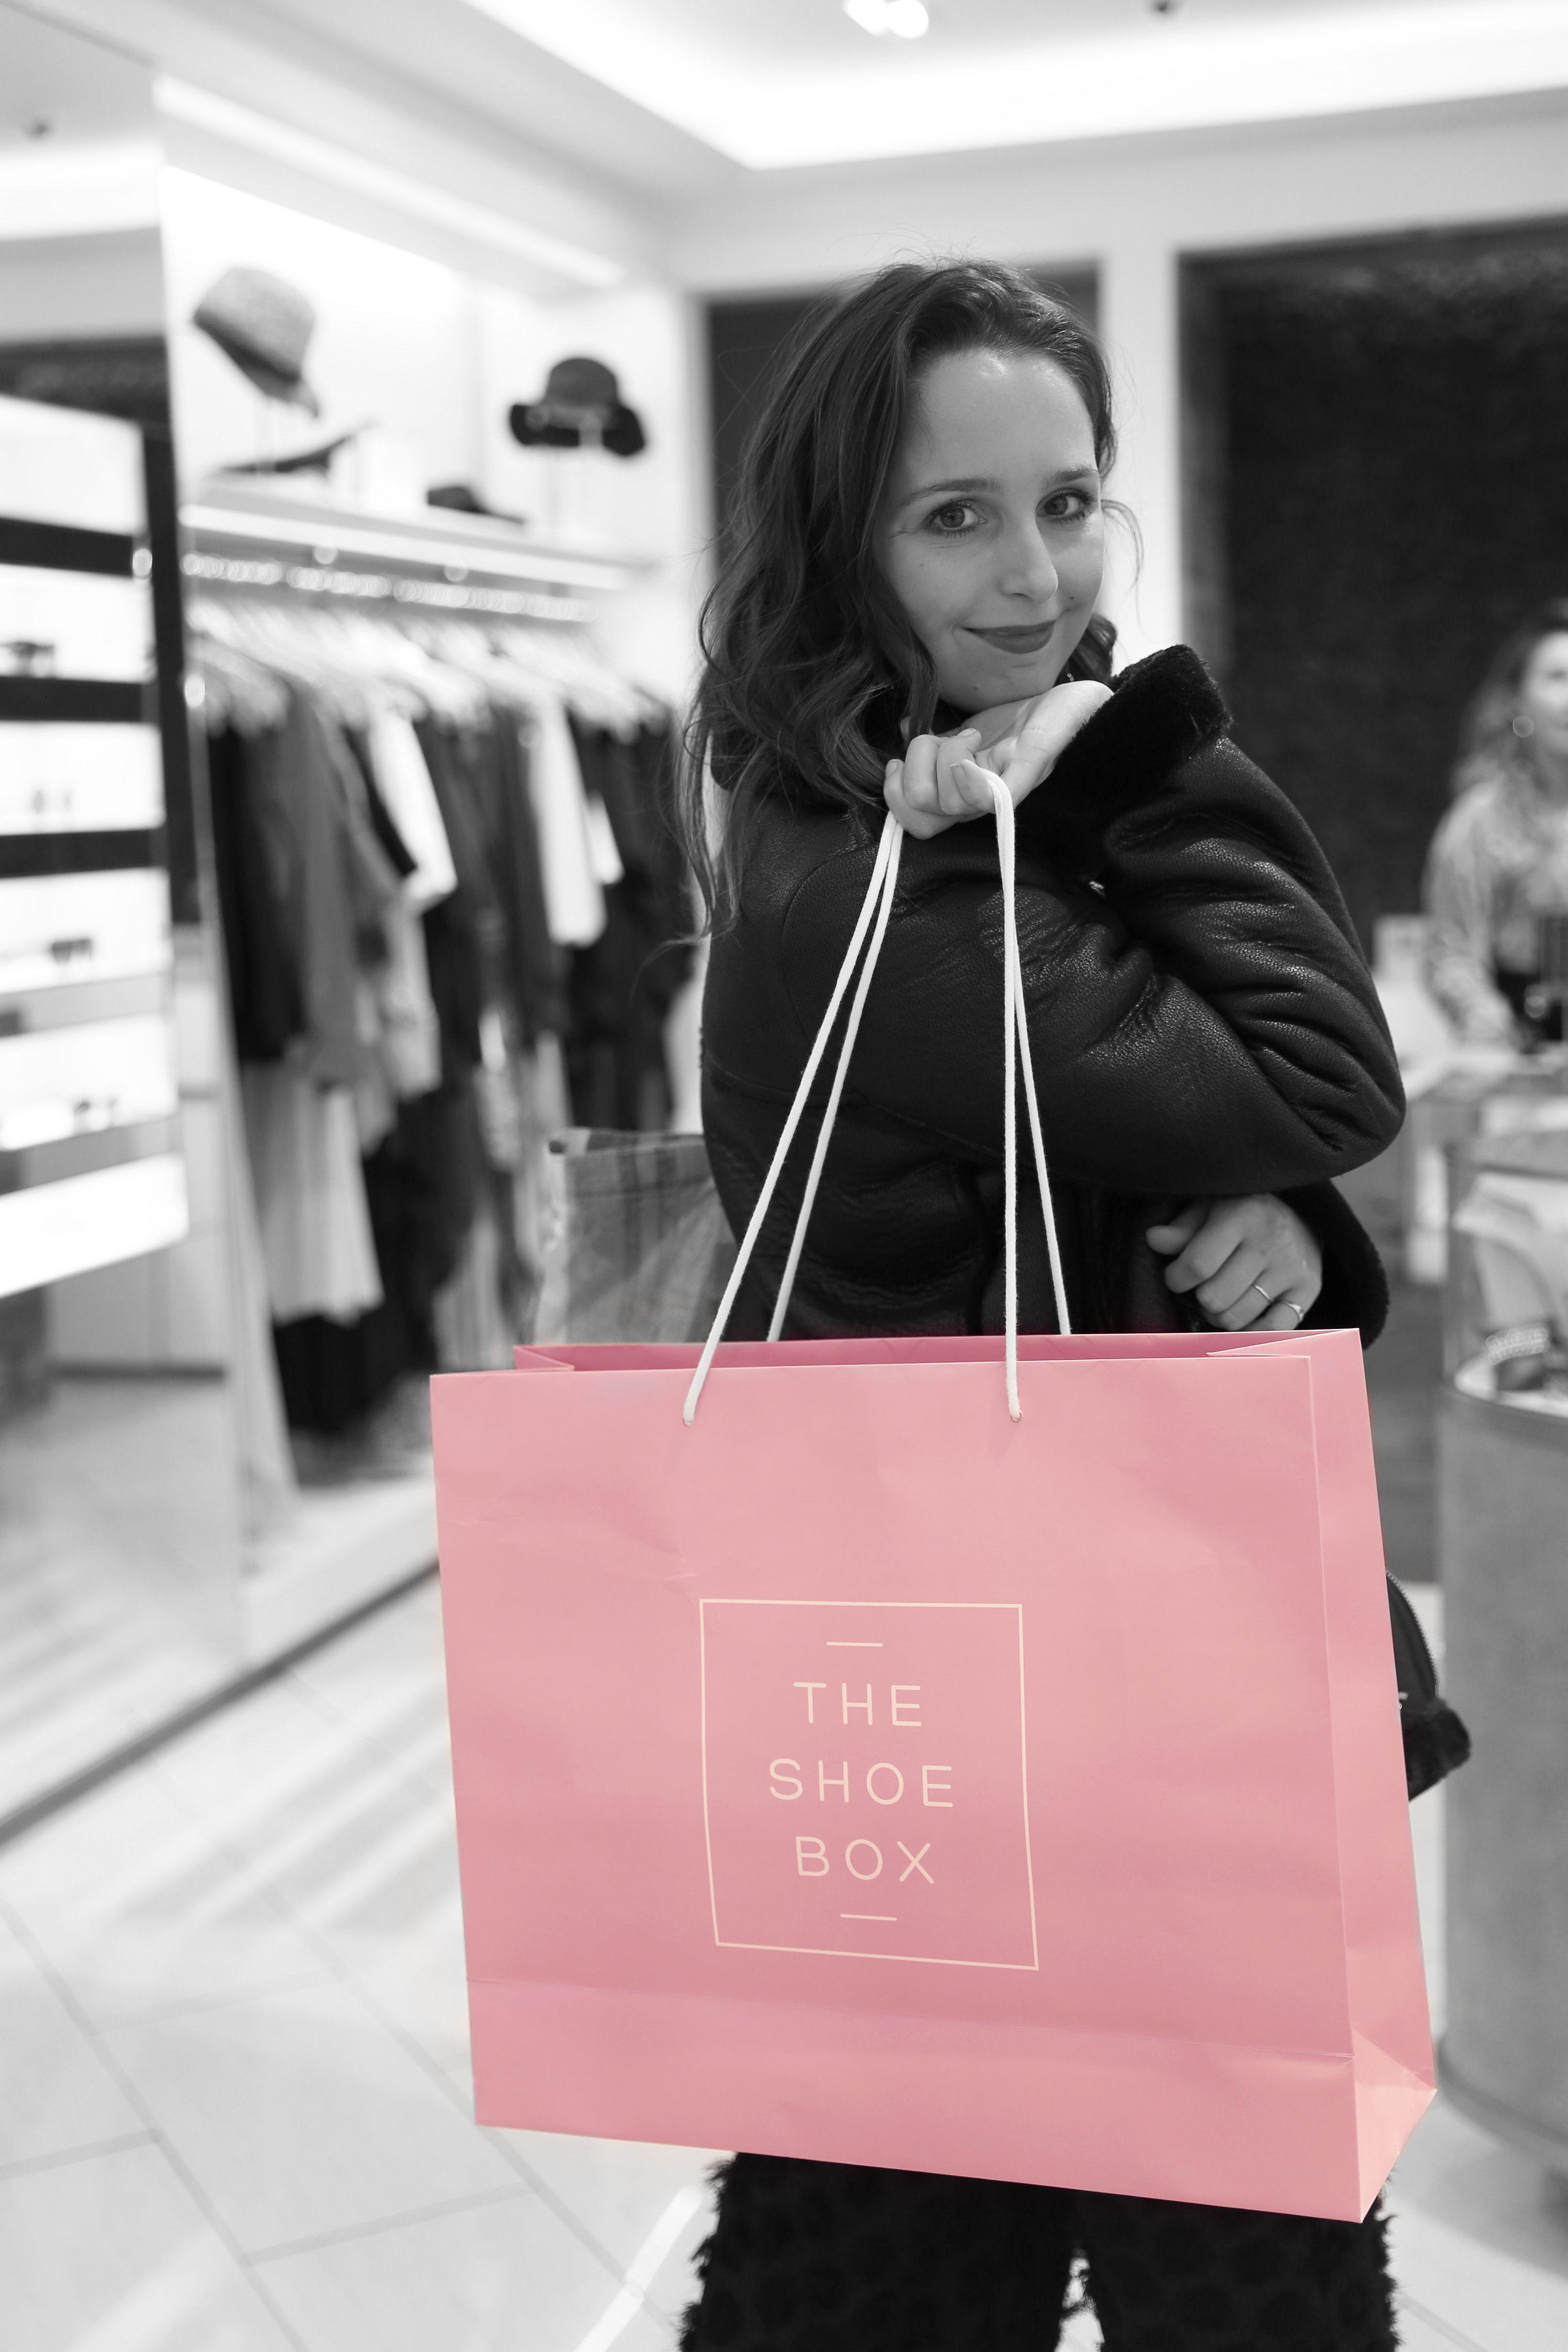 Shoebox NYC Event Simply by Simone-Hosting The Shoe Box Flatiron Schutz Launch-Blogger-Style-event-host